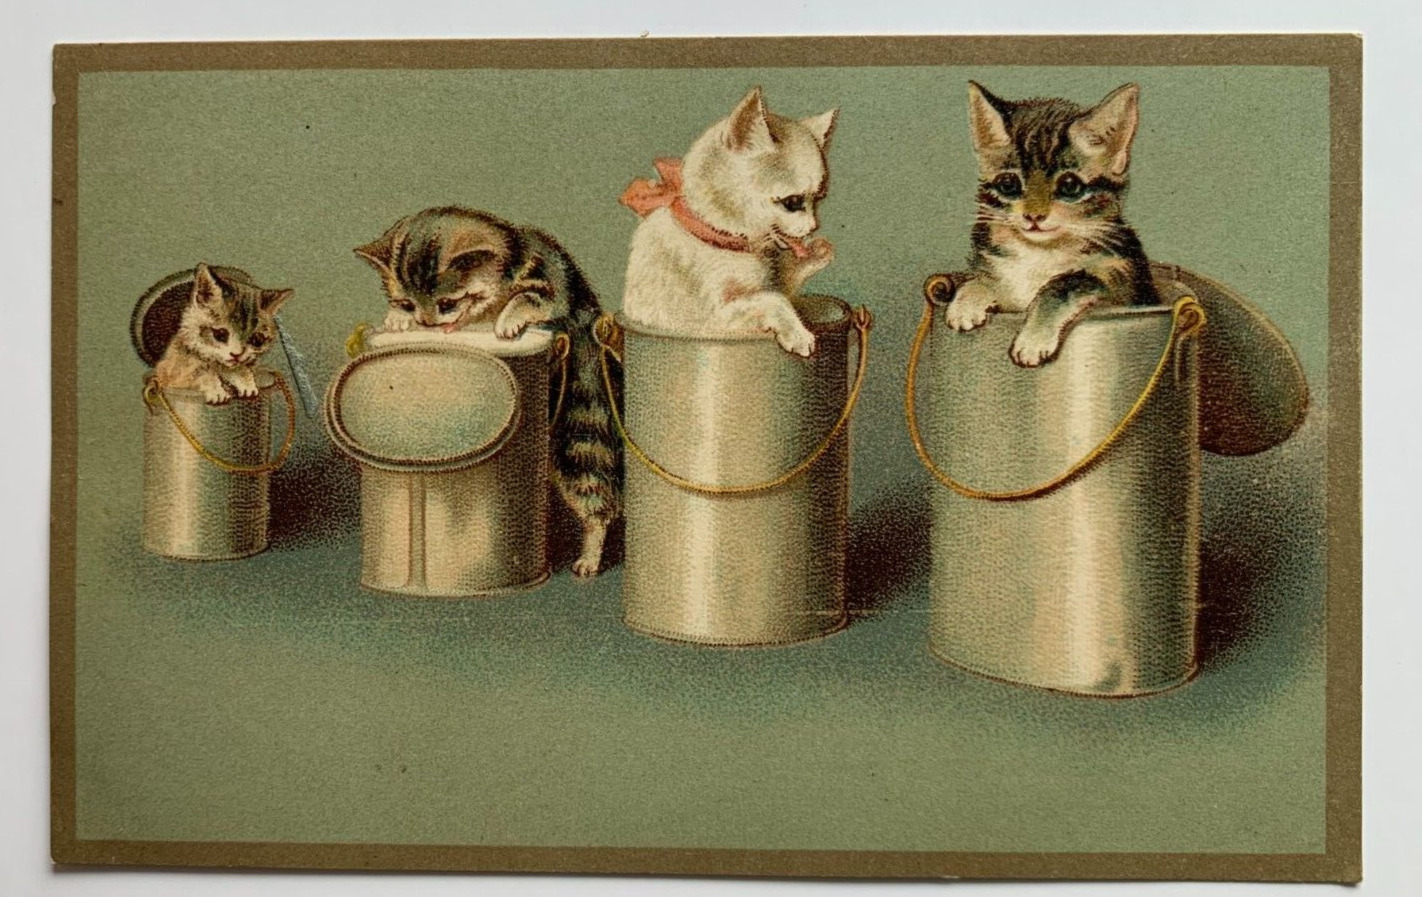 Vintage ca 1900s Postcard Cats Kittens in Tins Containers art